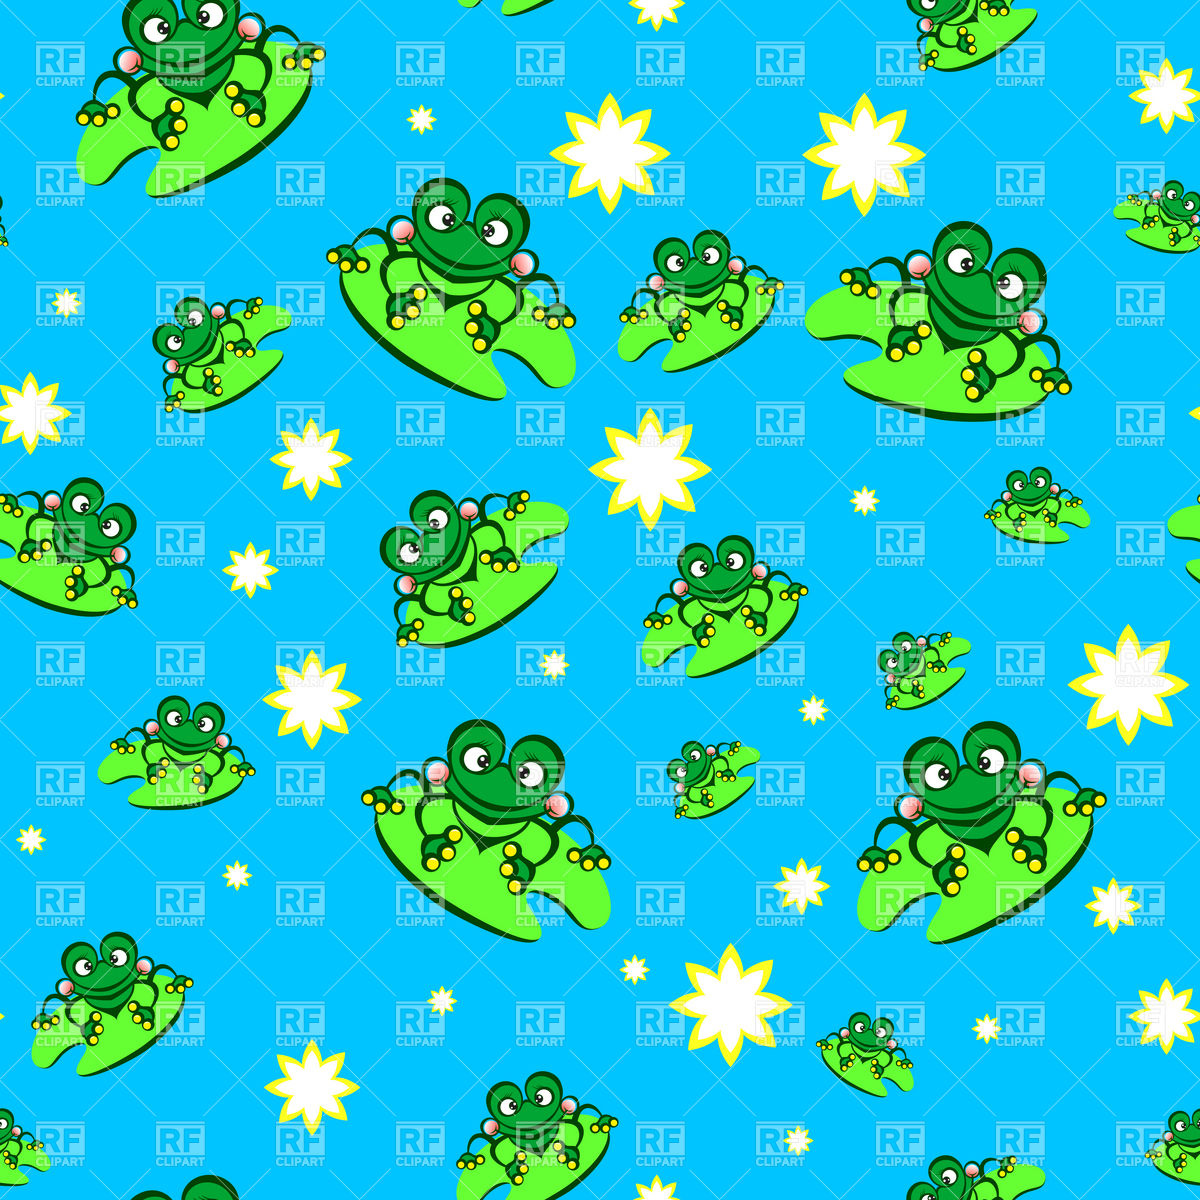 Funny Frog Cell Phone Wallpapers Hd Wallpaper Download - Cartoon Frog Backgrounds - HD Wallpaper 